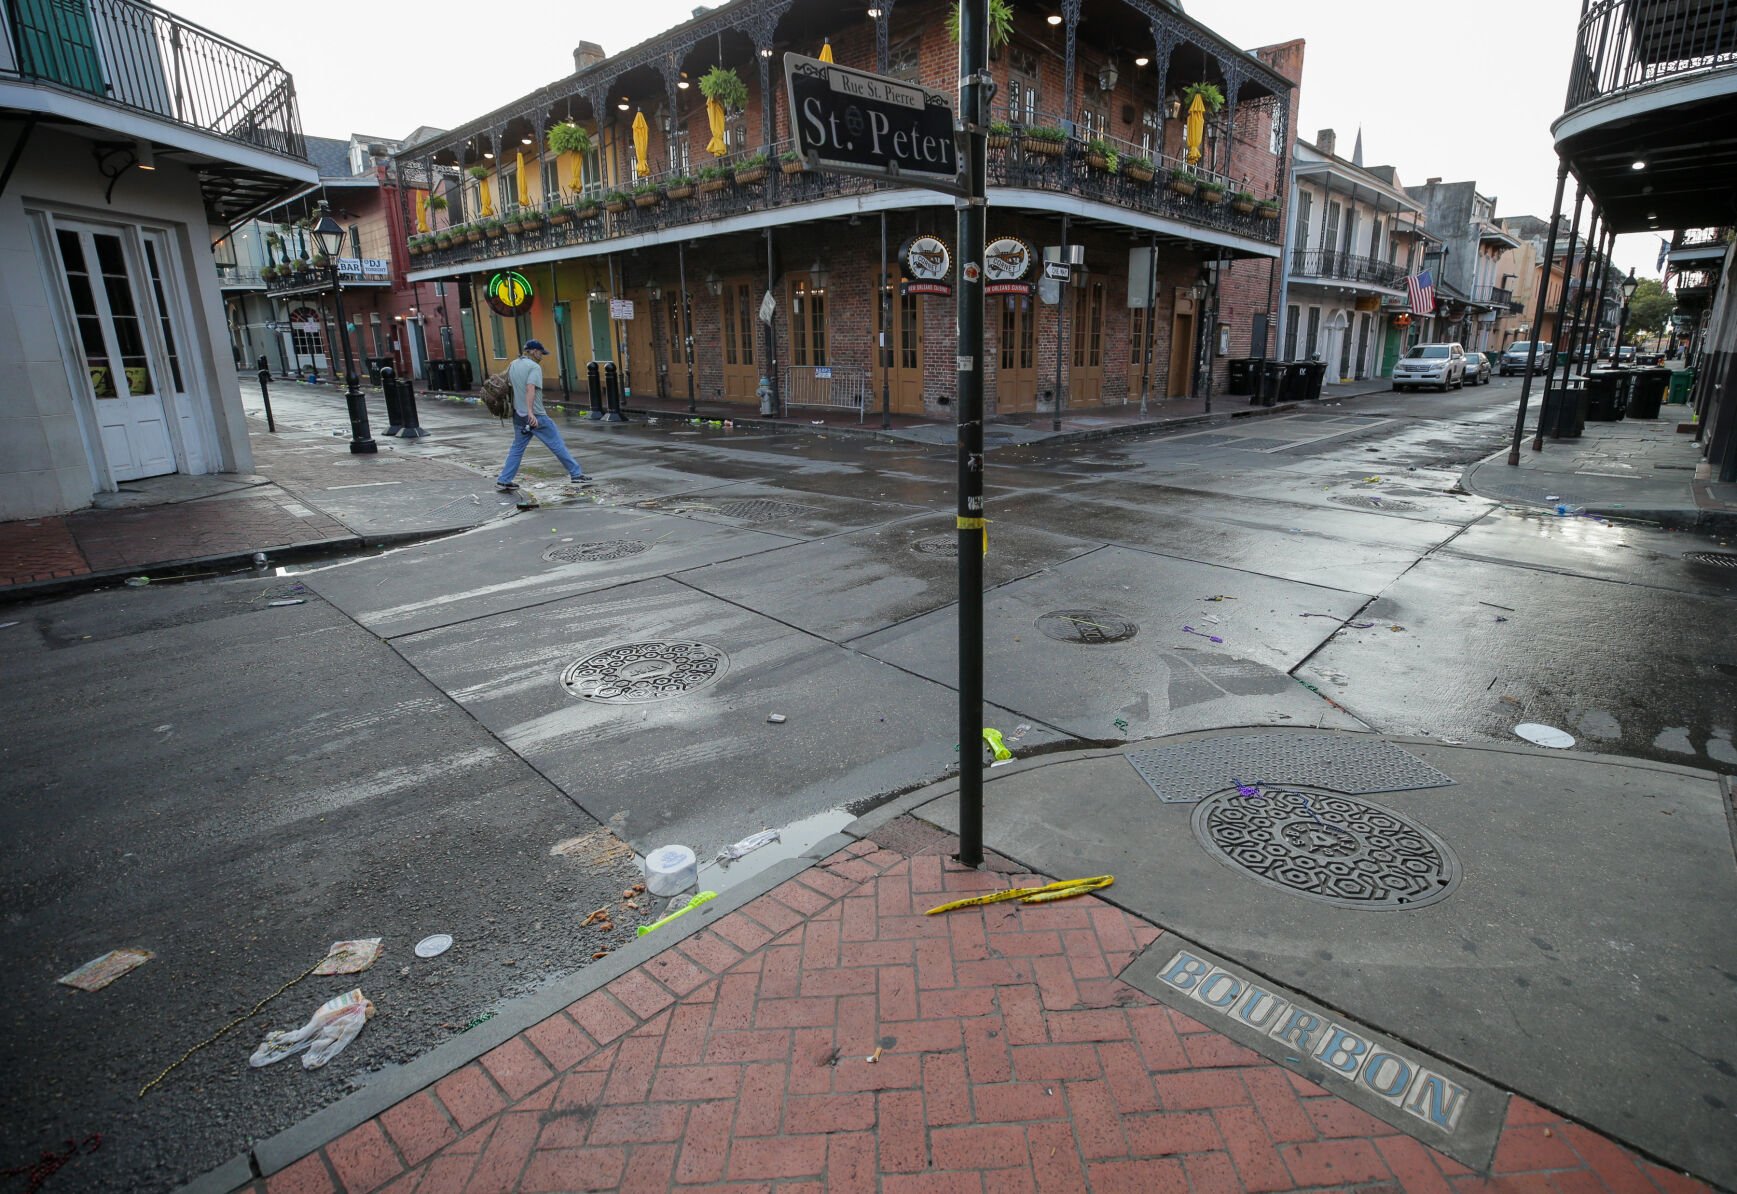 15 people shot Sunday in New Orleans, including 5 on Bourbon Street